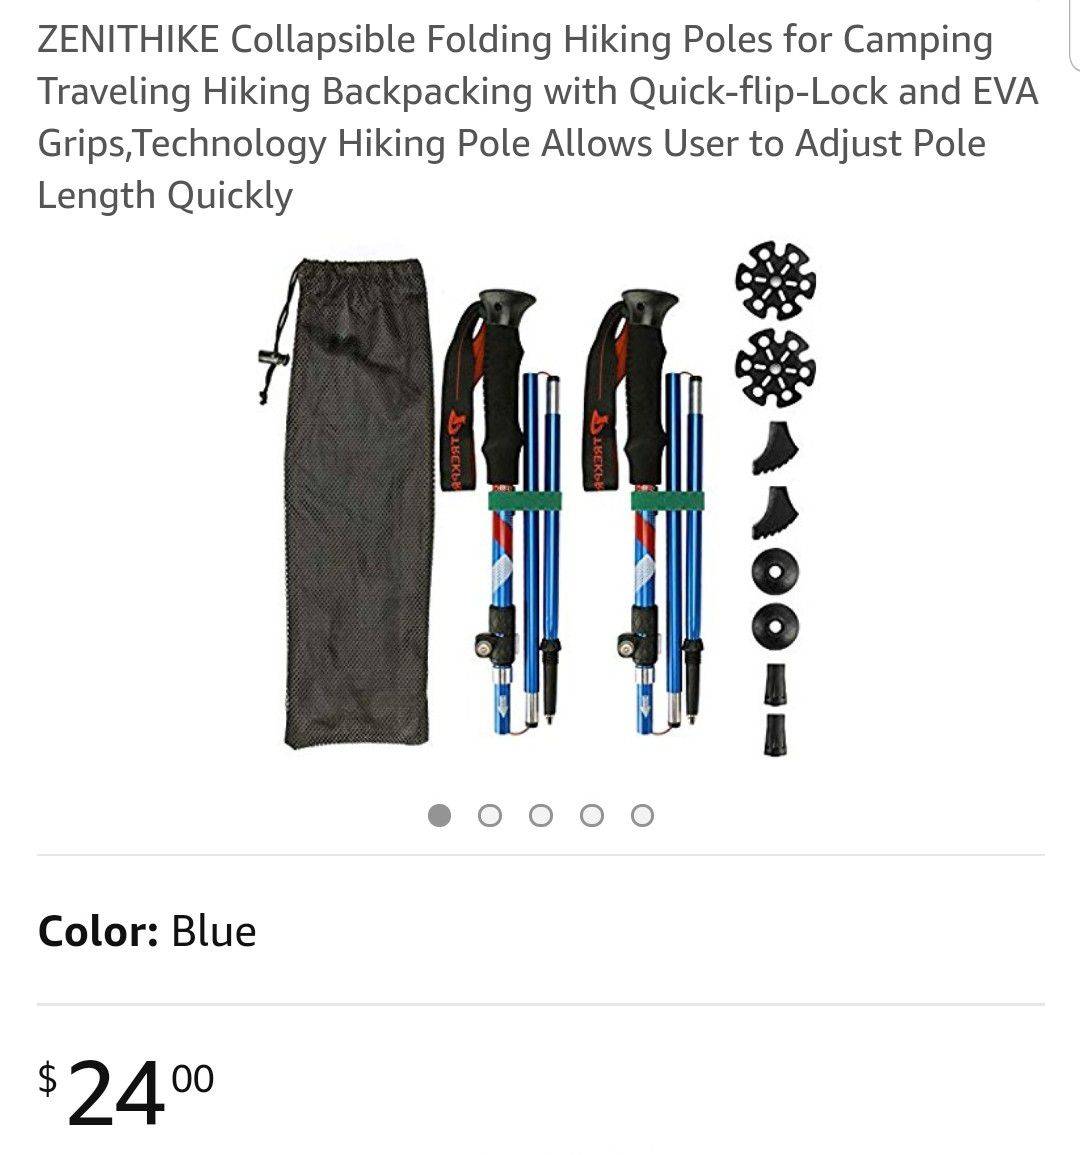 Collapsible Folding Hiking Poles for Camping Traveling Hiking Backpacking with Quick-flip-Lock and EVA Grips,